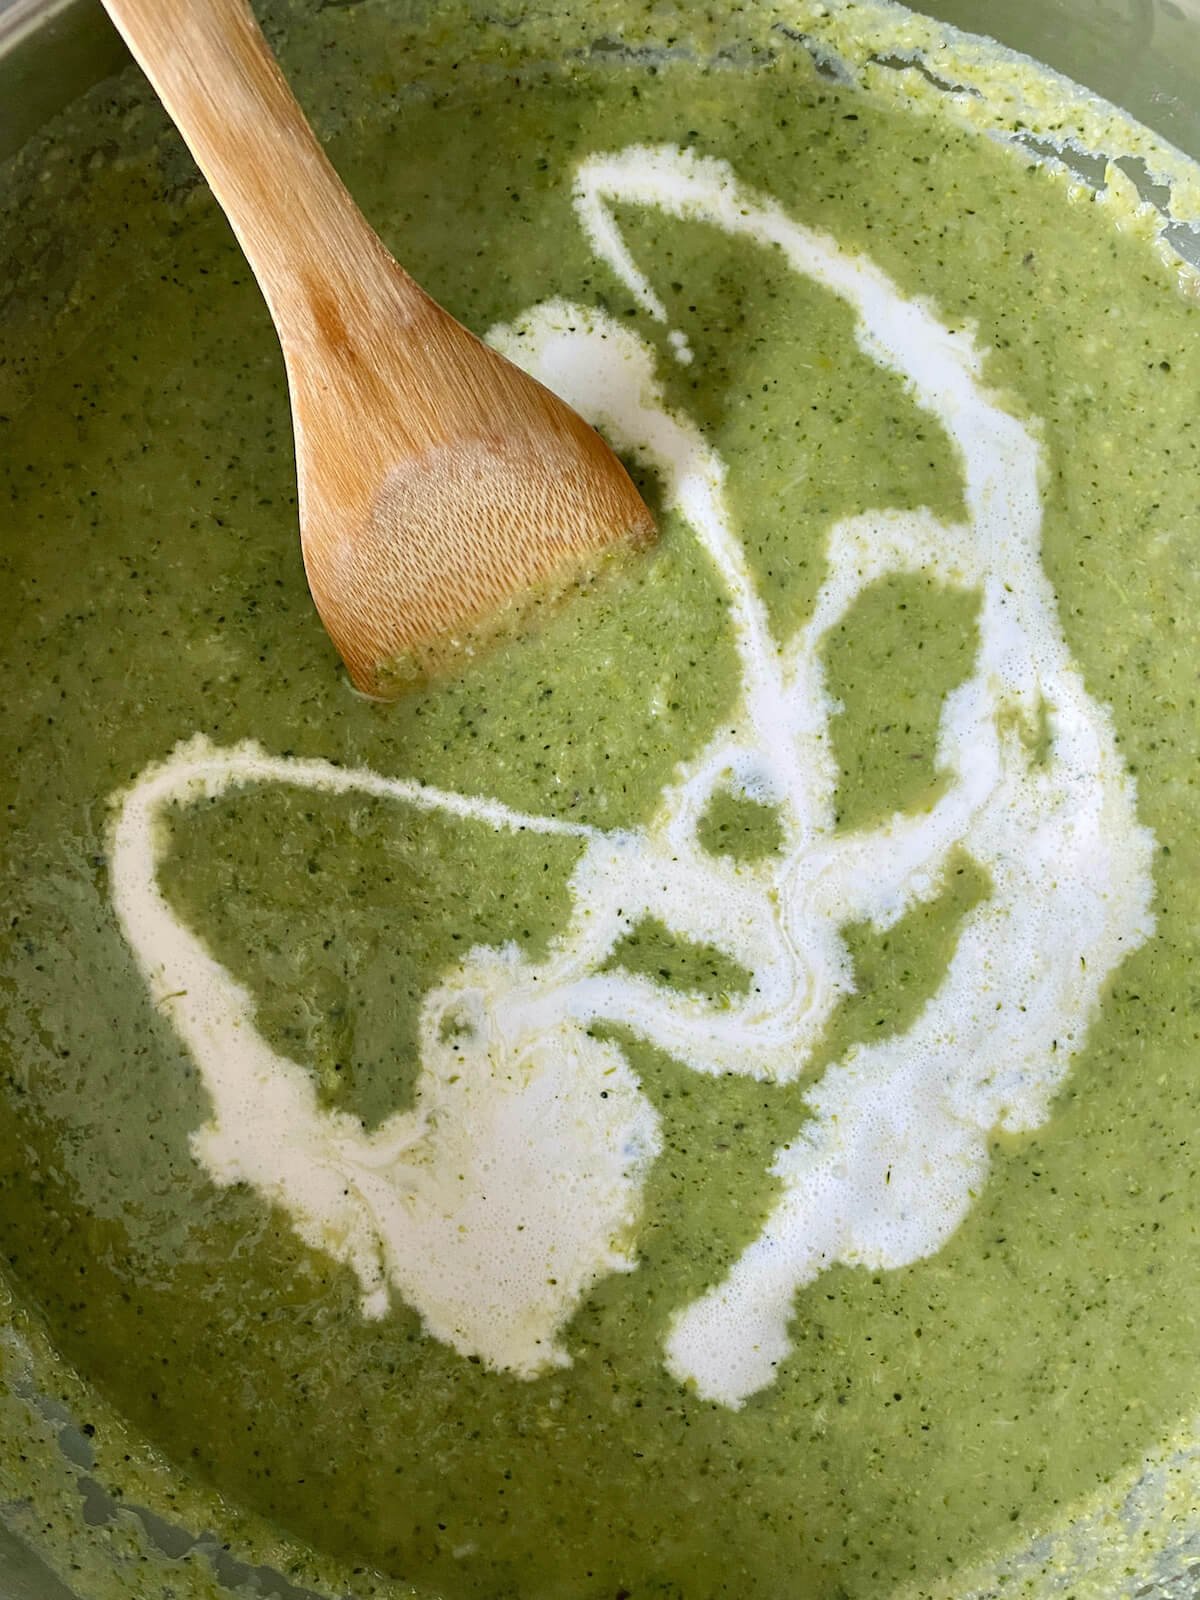 Heavy cream being added to the puréed soup.